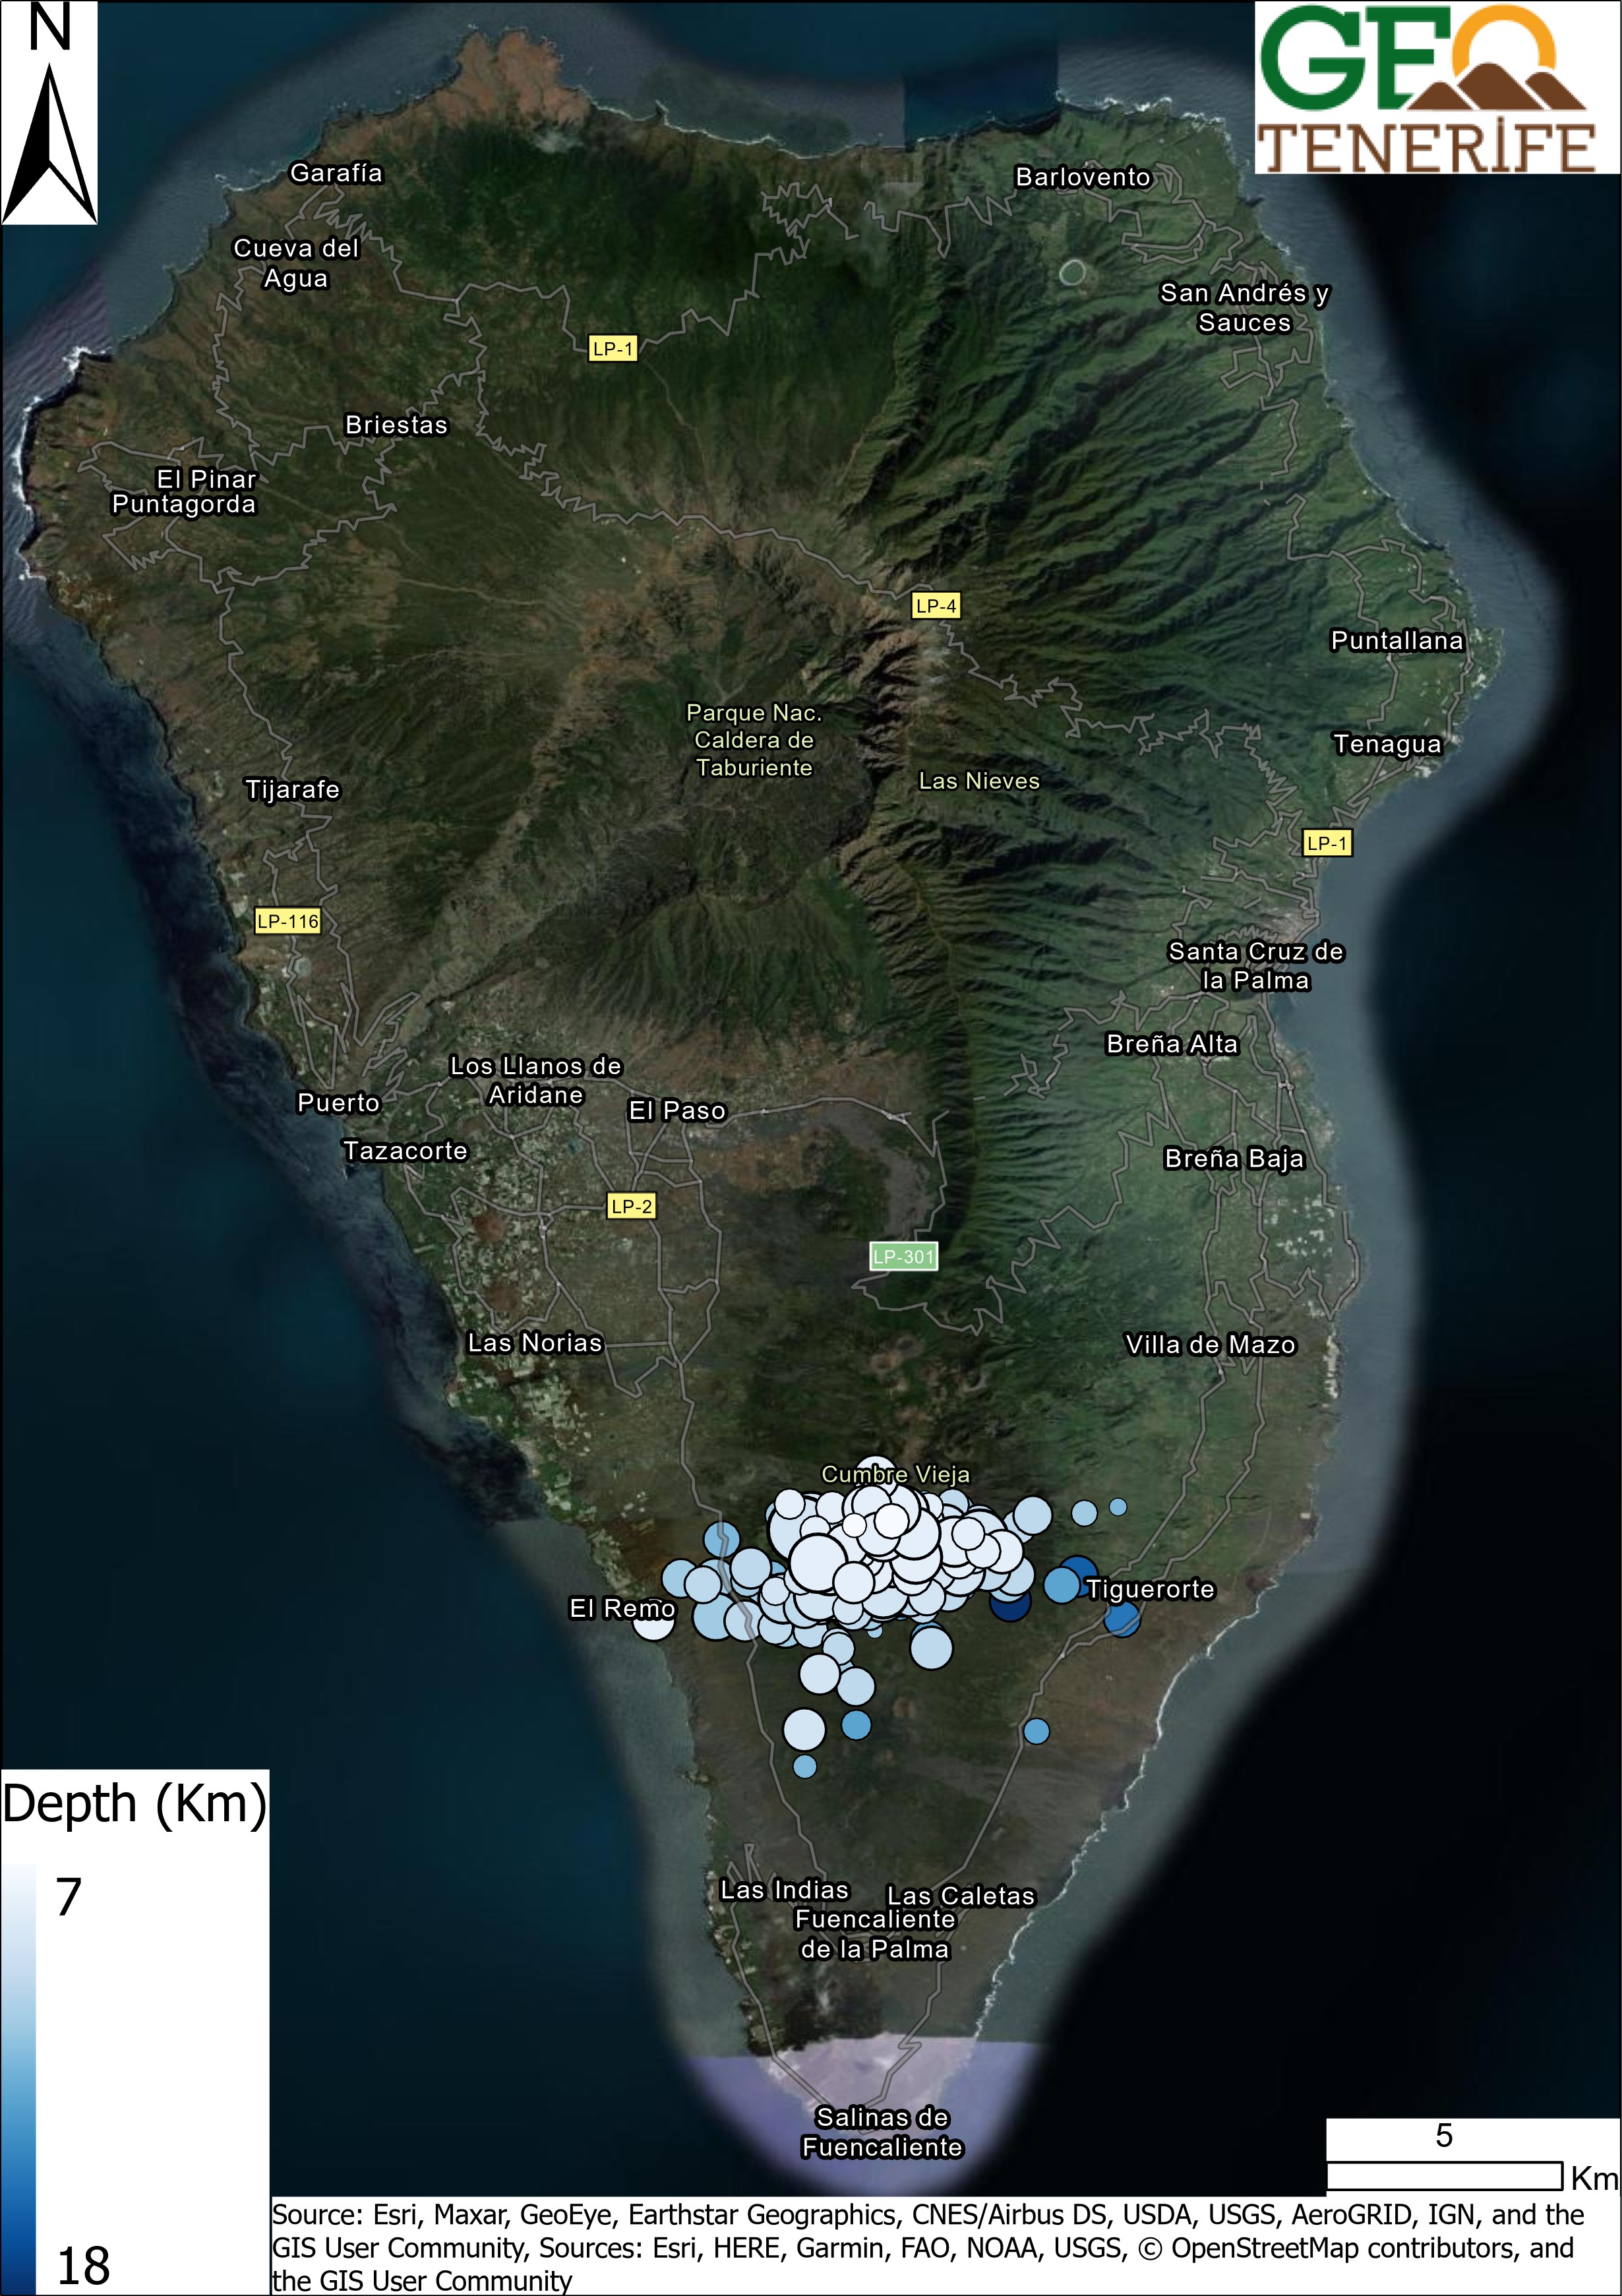 A map showing earthquakes recorded on La Palma on the 12th September. The earthquakes are located to the south of the island